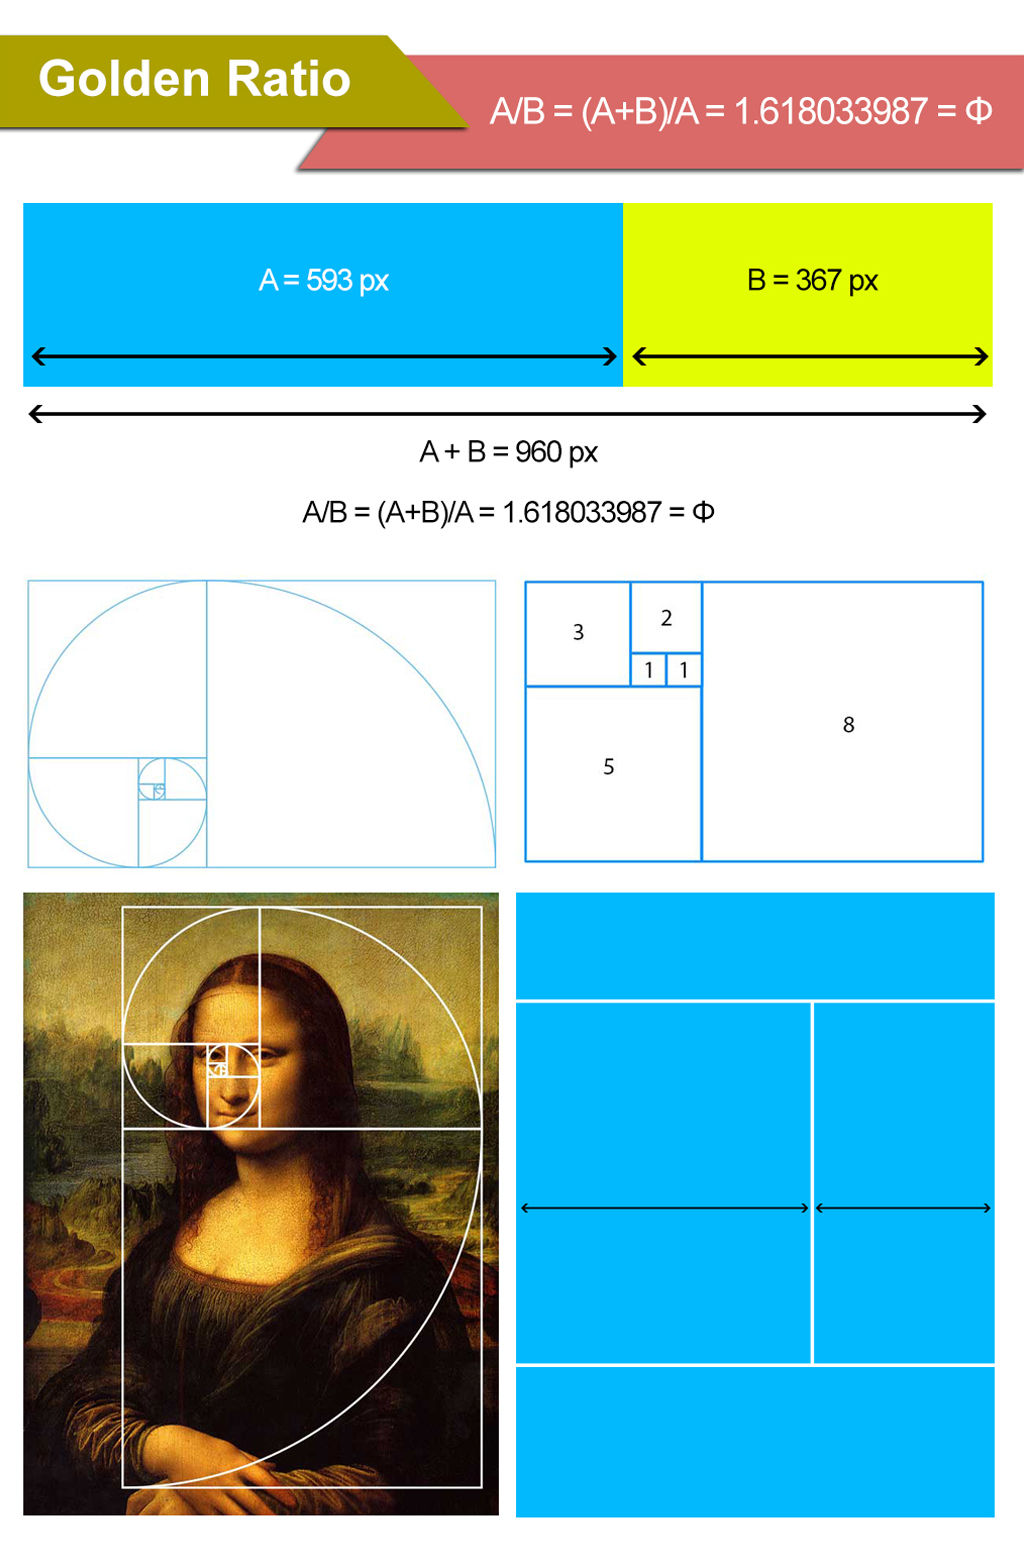 The Golden Ratio - Principles of form and layout | Interaction Design